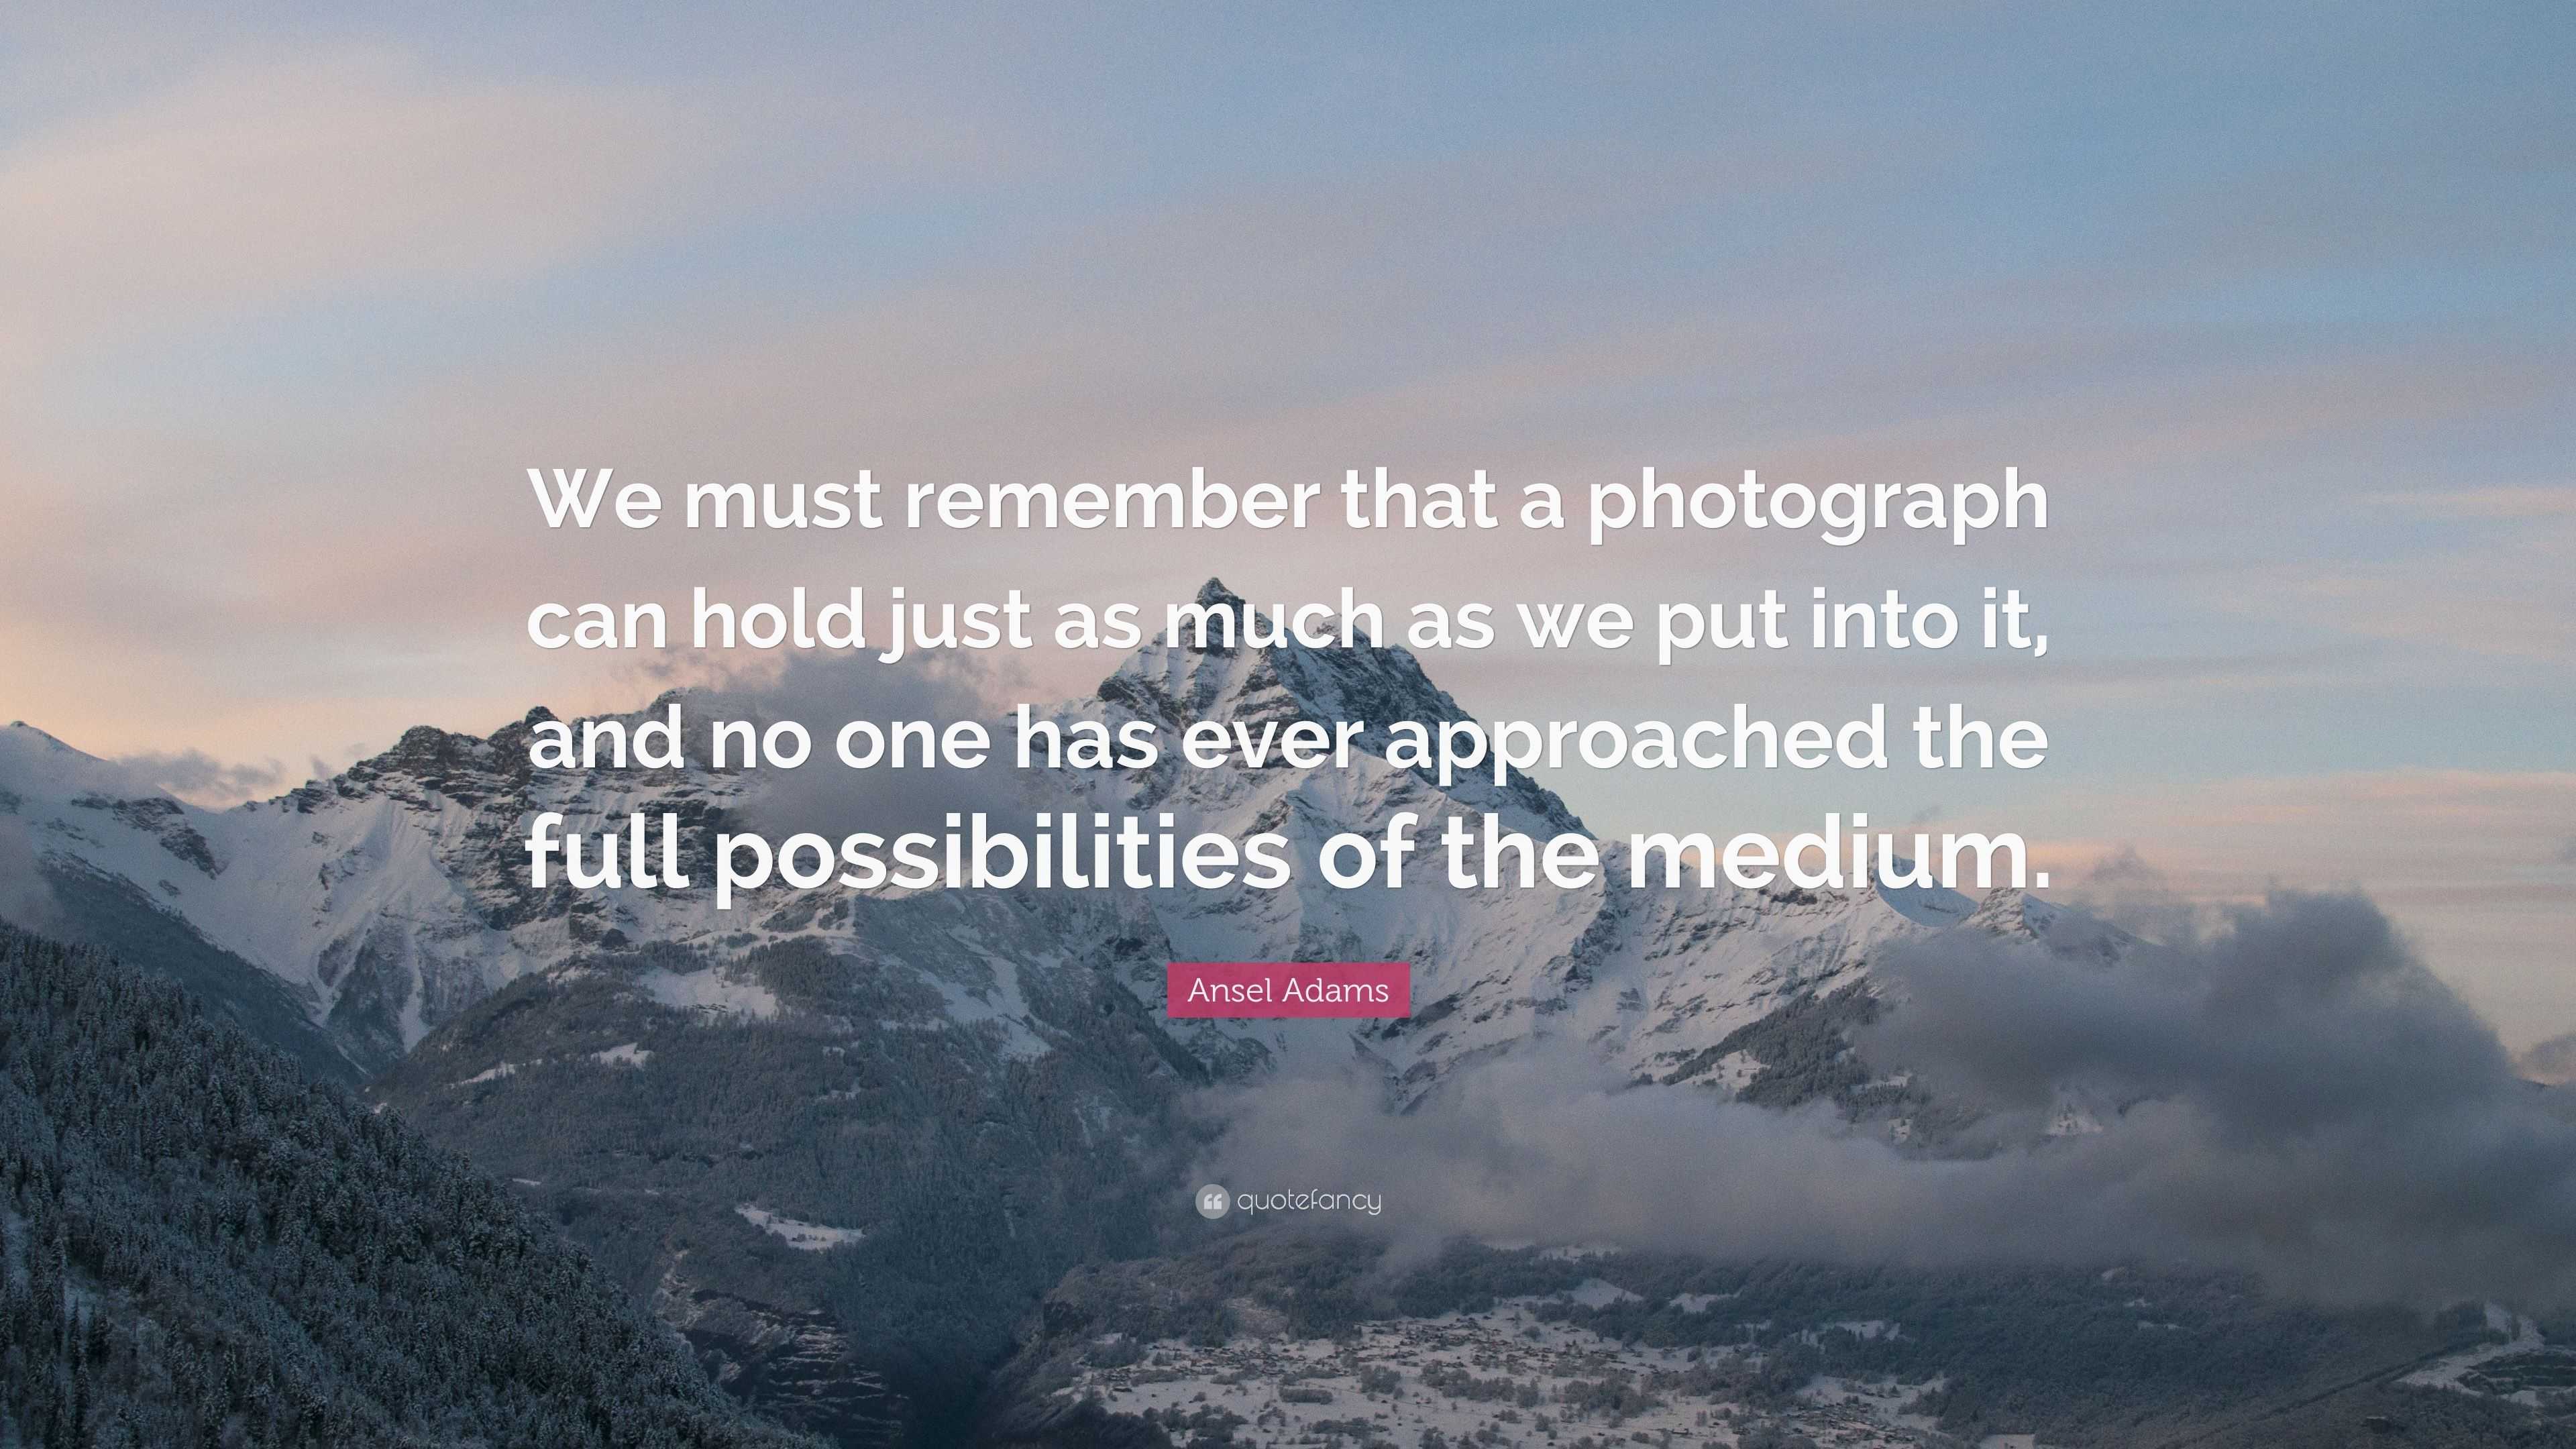 Ansel Adams Quote: “We must remember that a photograph can hold just as  much as we put into it, and no one has ever approached the full poss...”